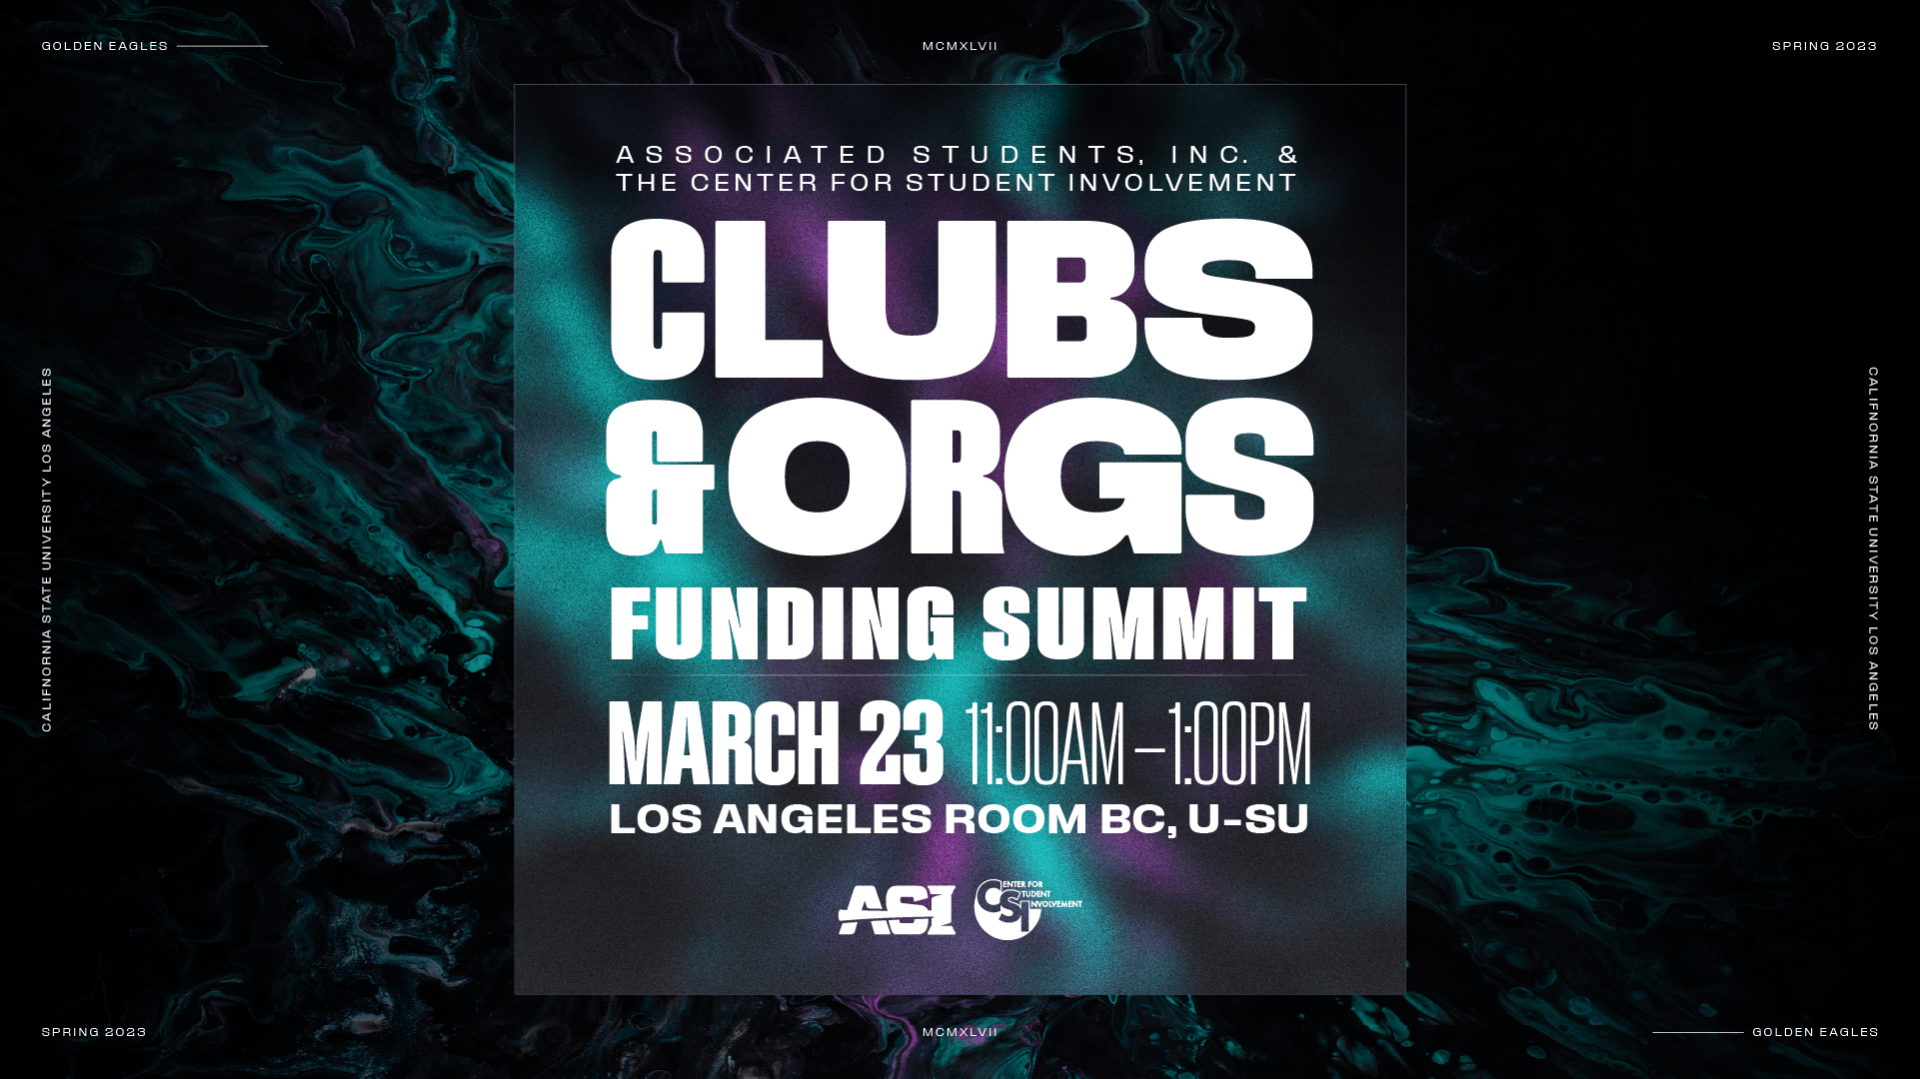 Clubs and Orgs Funding Summit